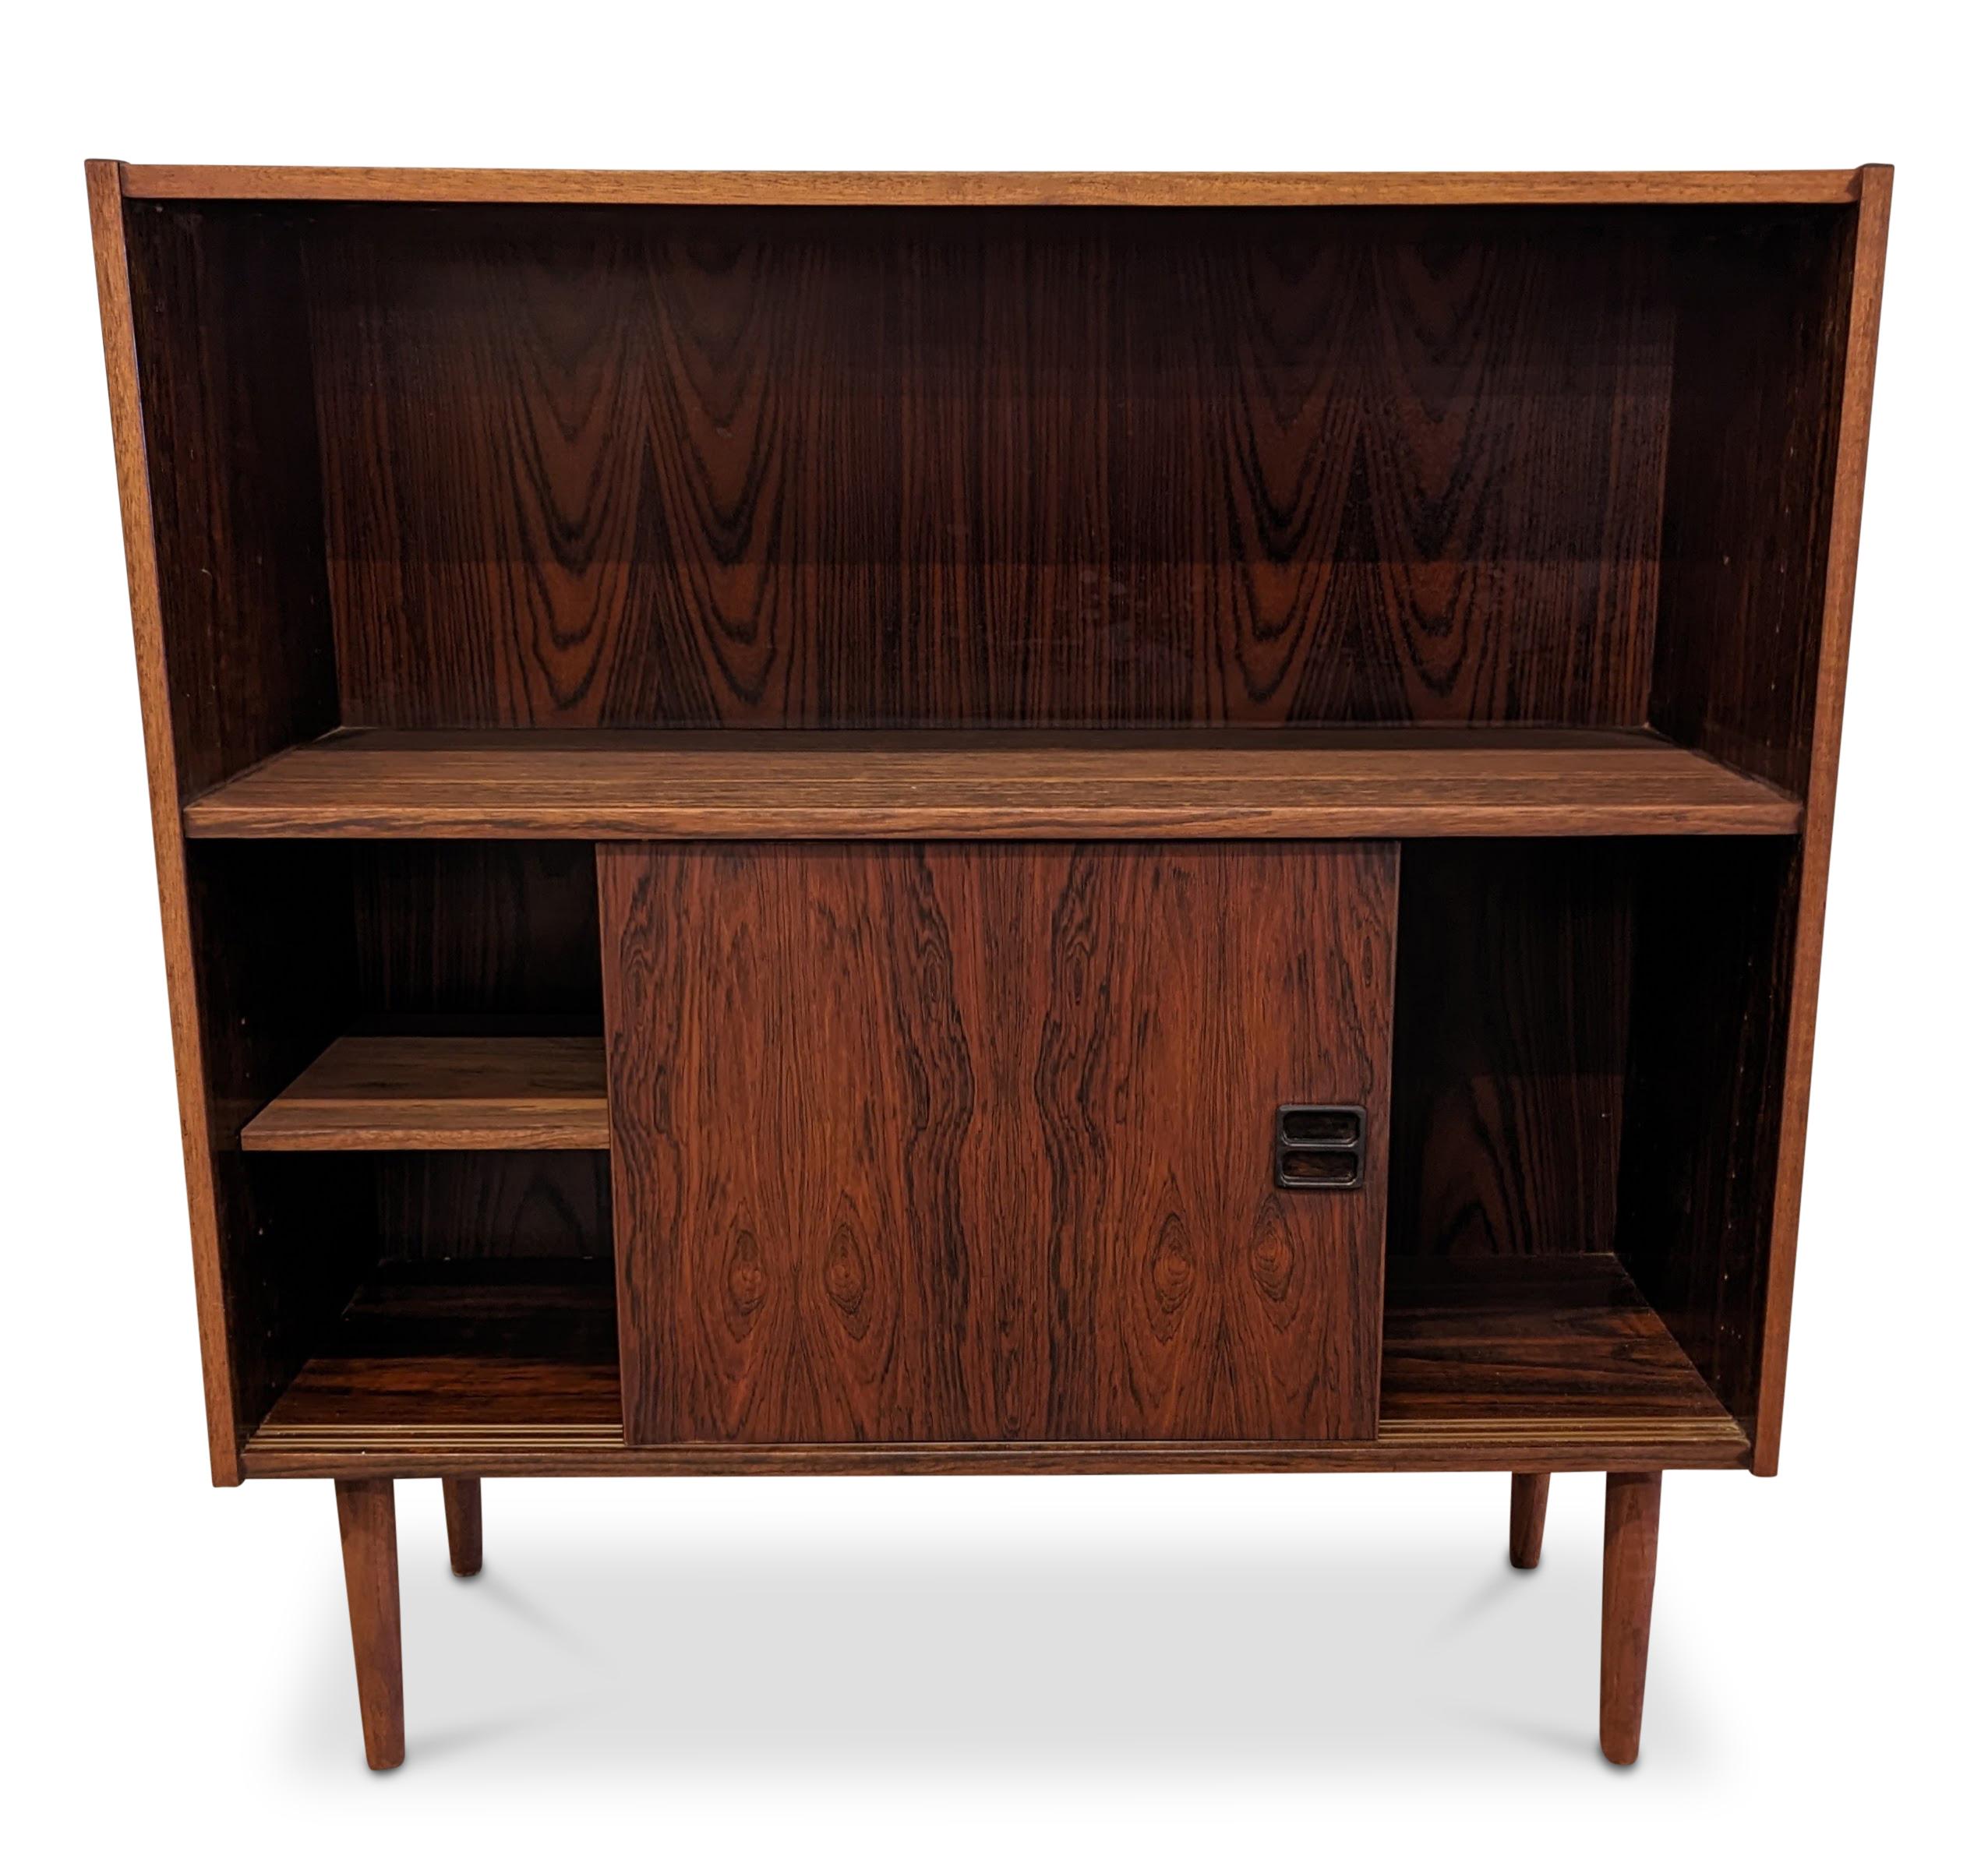 Vintage Danish Mid-Century Modern, made in the 1950s - Recently refurbished
Brazilian rosewood have been illegal to harvest since 1961 and on the U.N. CITES list of endangered spices since 1992. For each piece of rosewood furniture we import to the